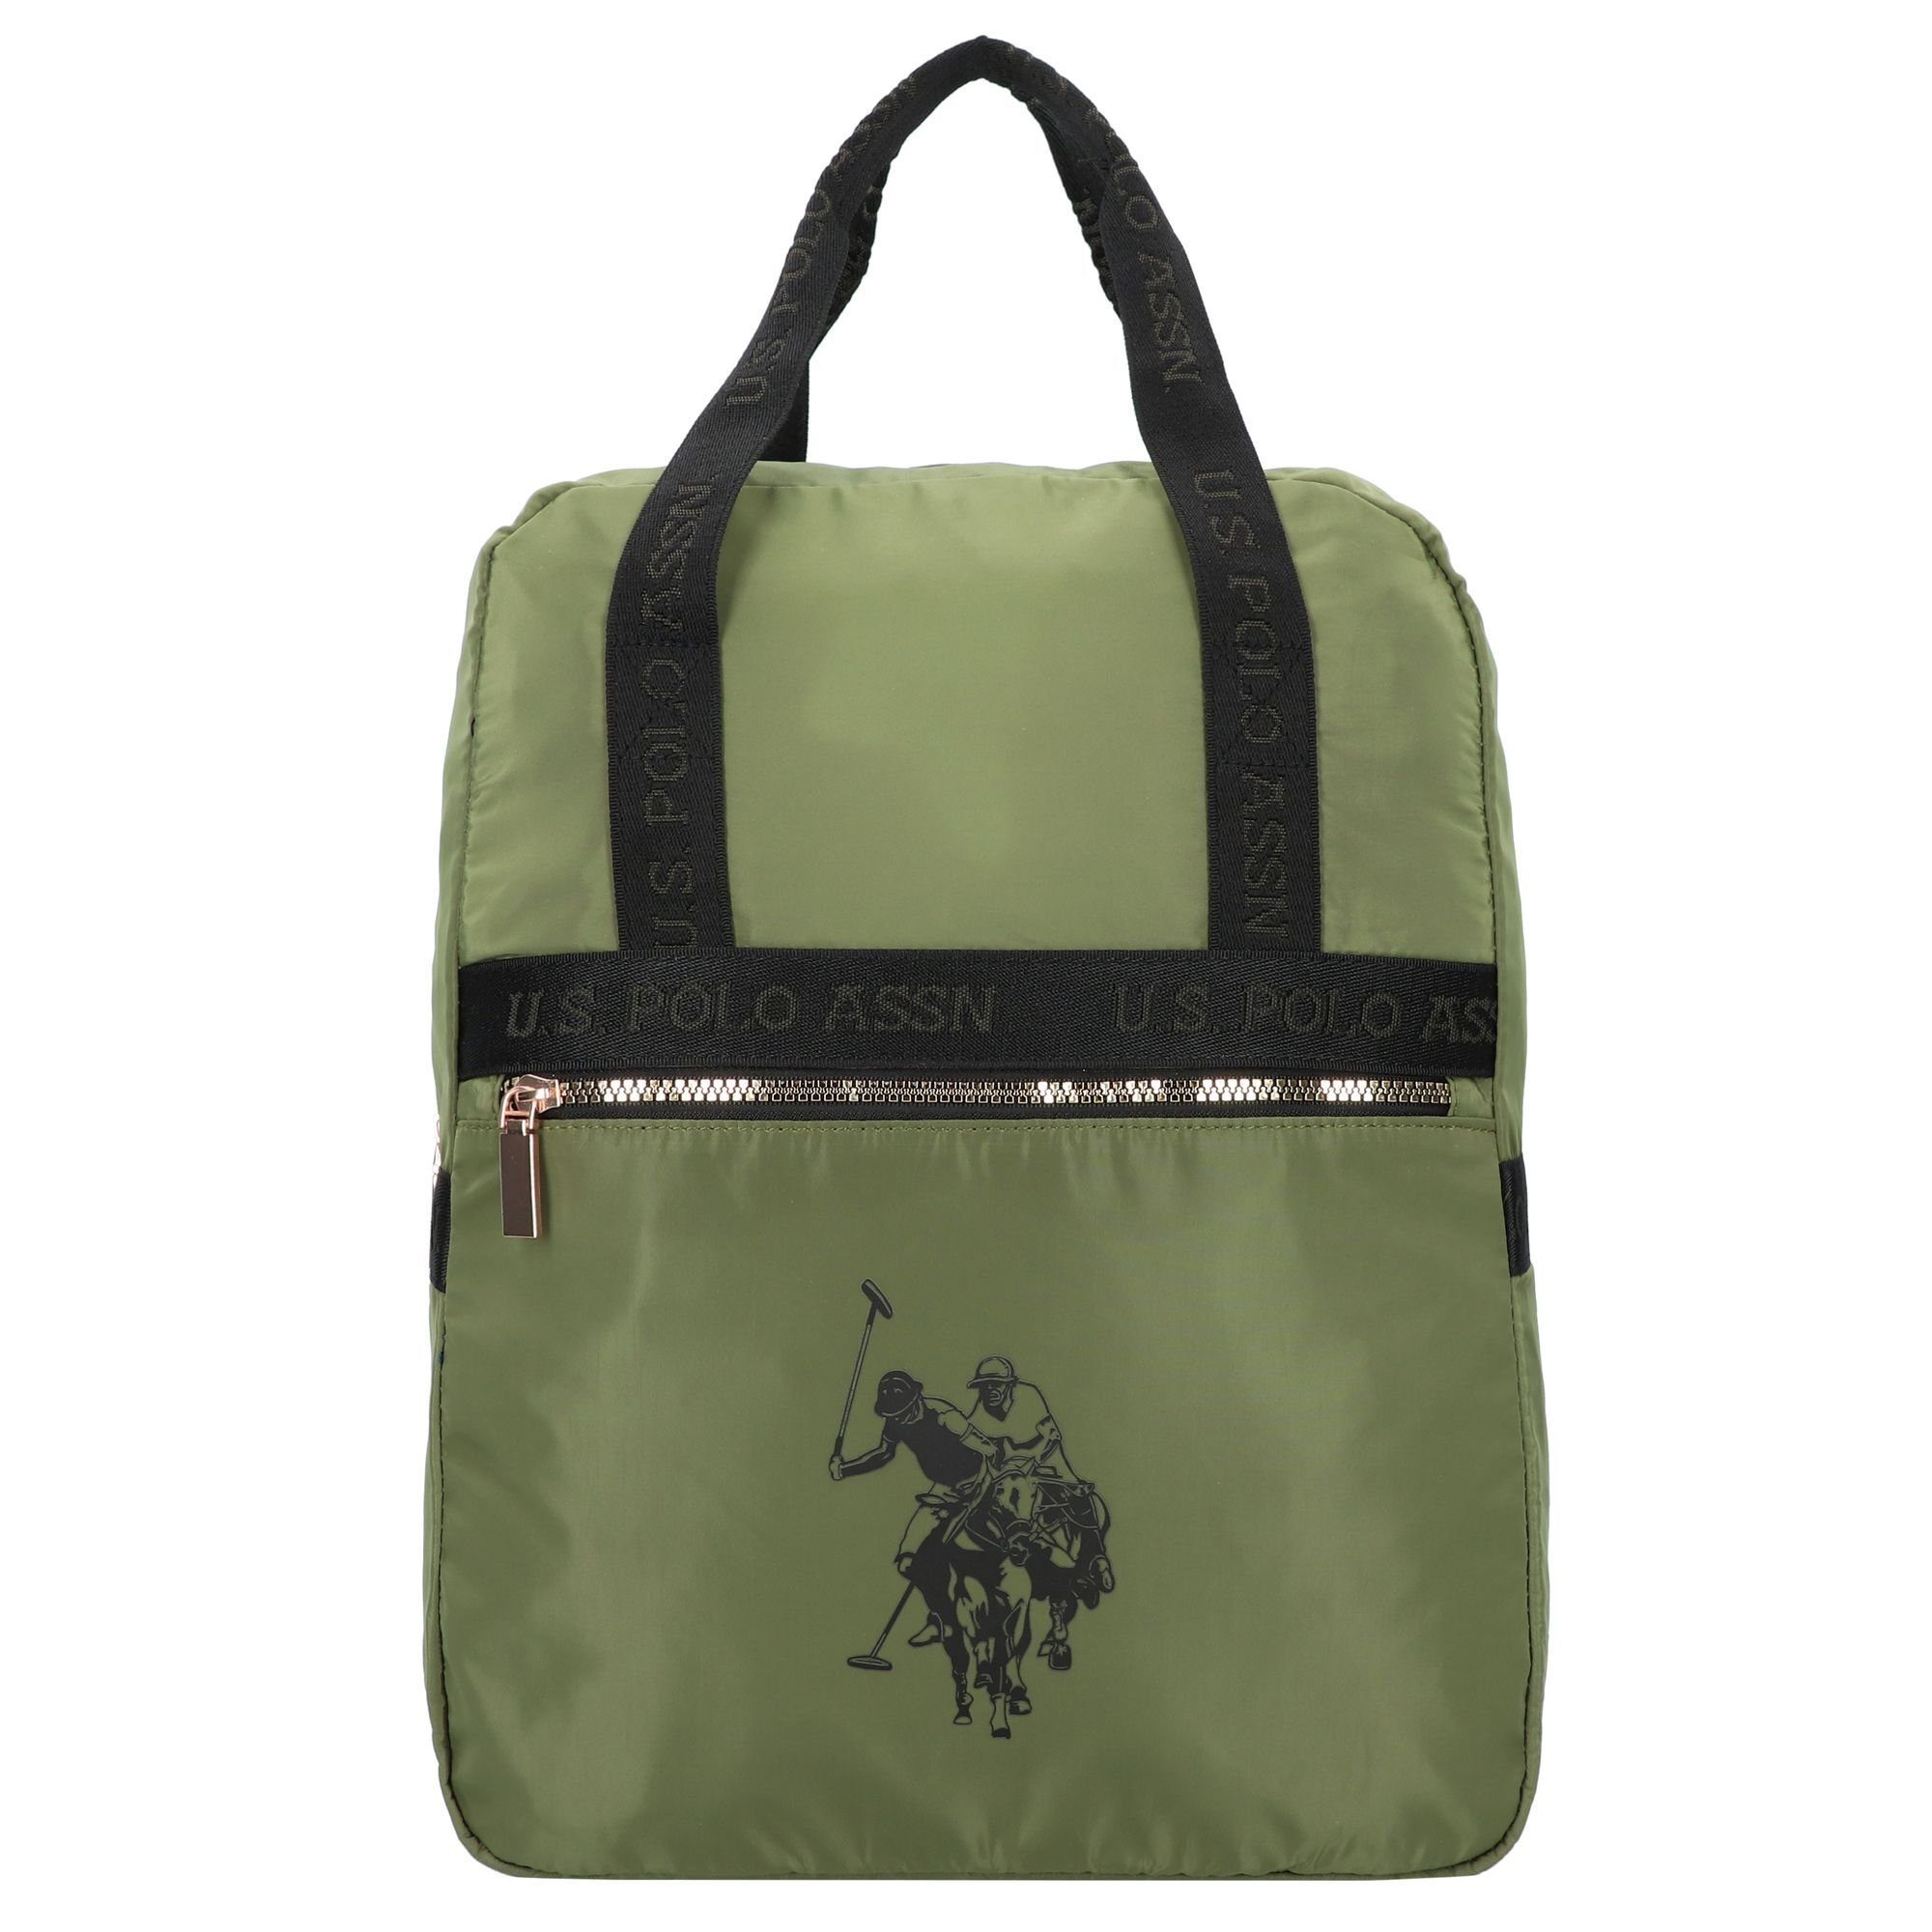 U.S. green Polo Chic, Assn Sport Daypack New Polyester